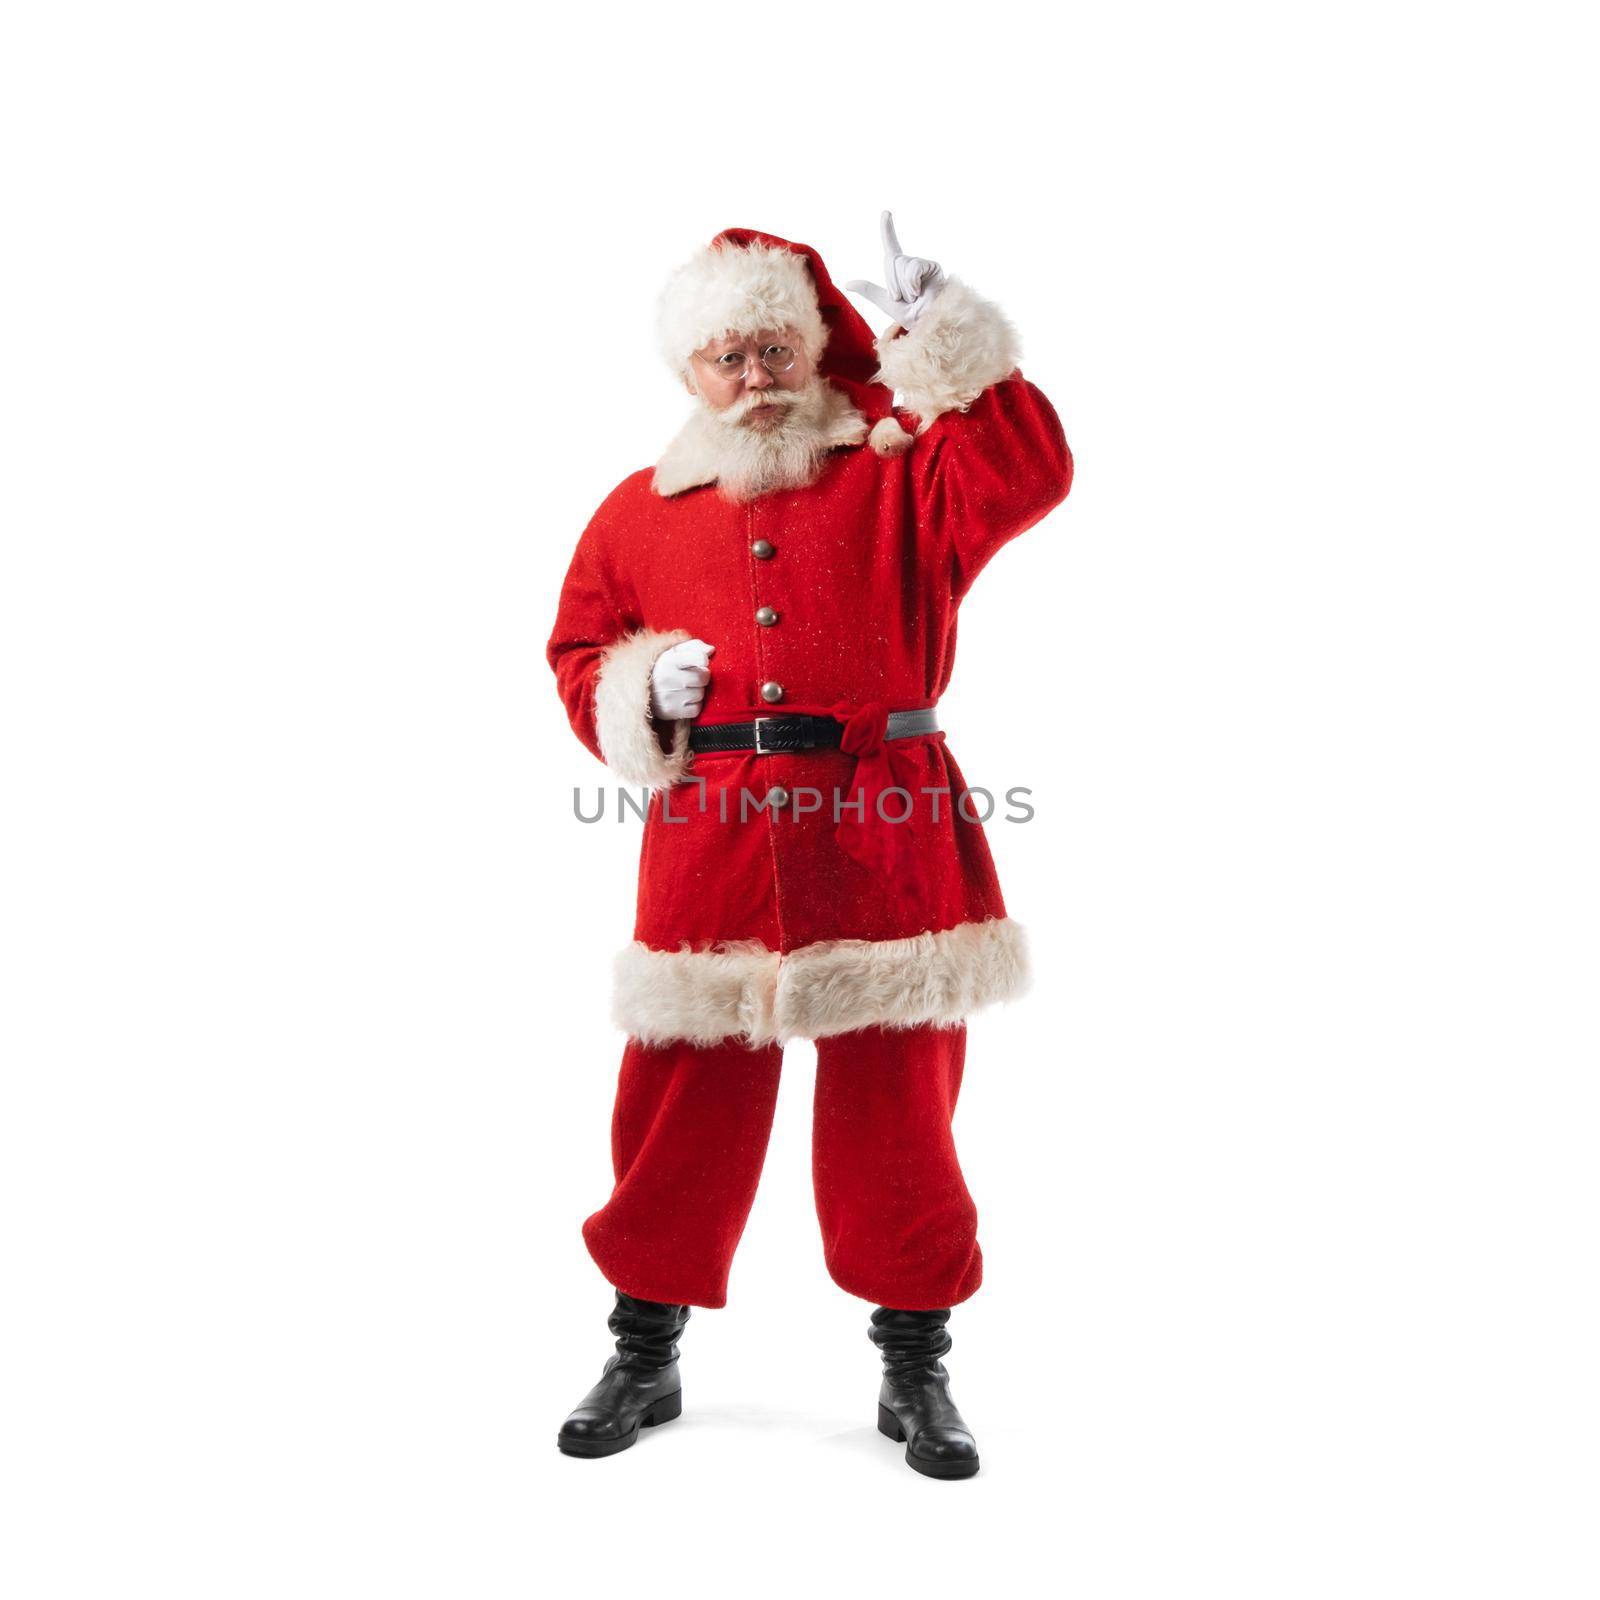 Full length portrait of Santa Claus pointing up studio isolated on white background